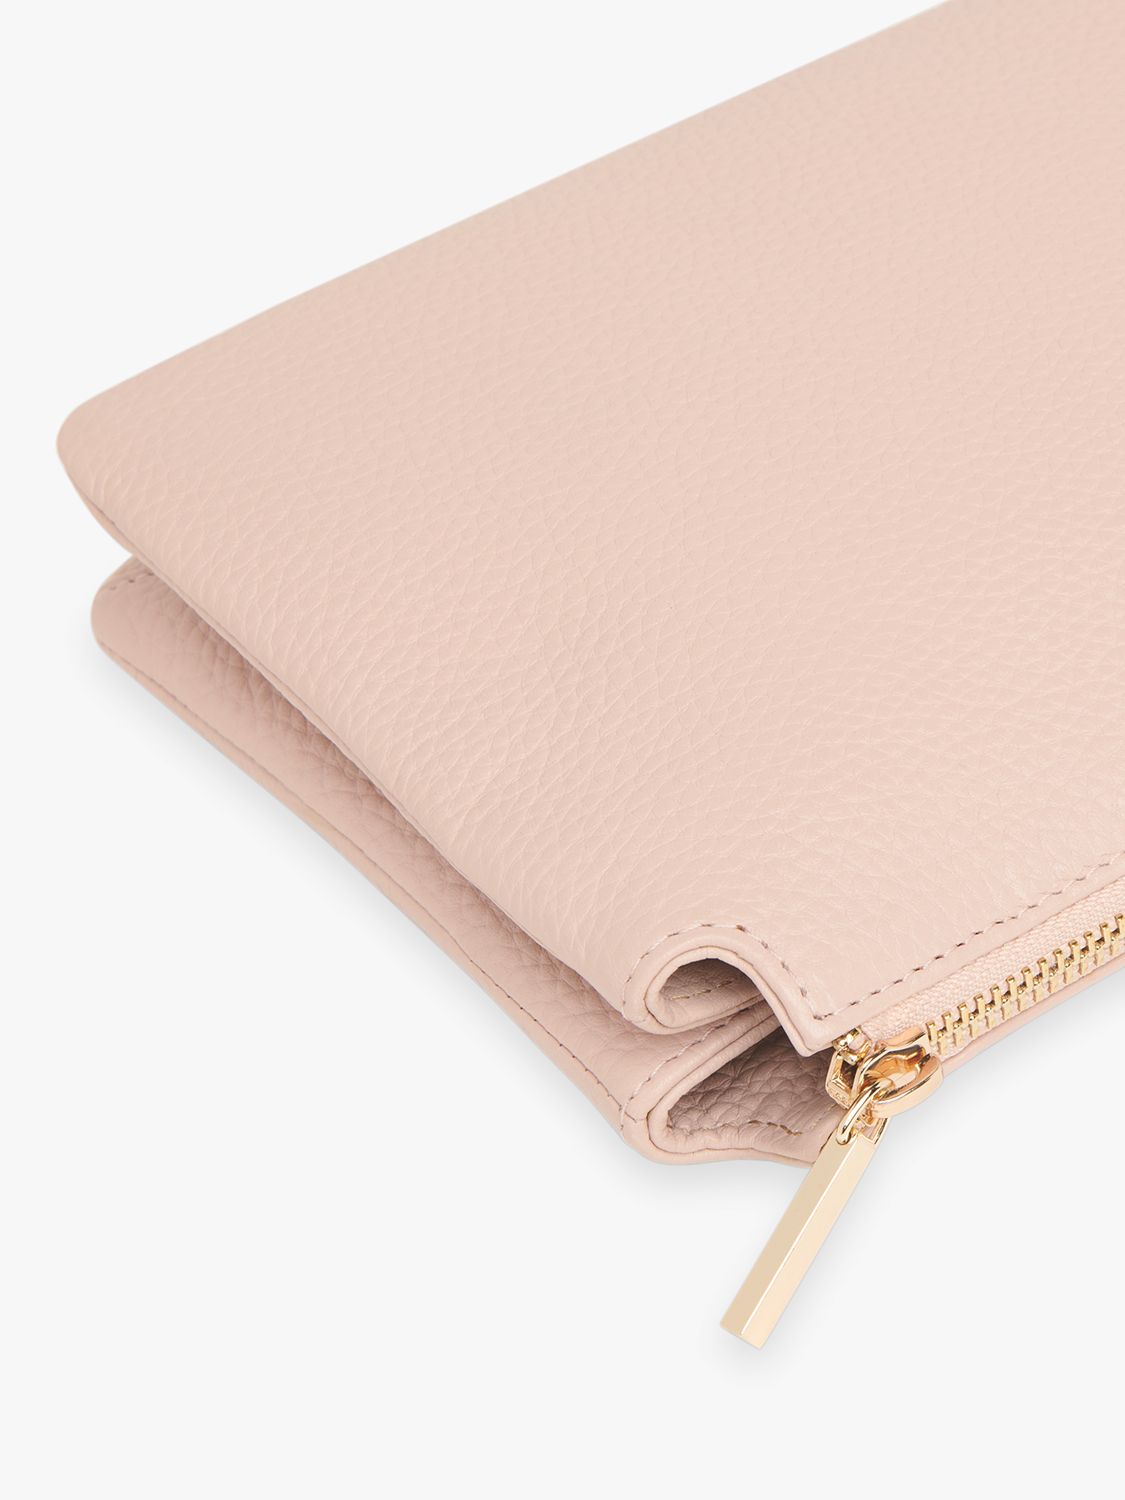 Whistles Elita Leather Double Pouch Clutch Bag, Pale Pink